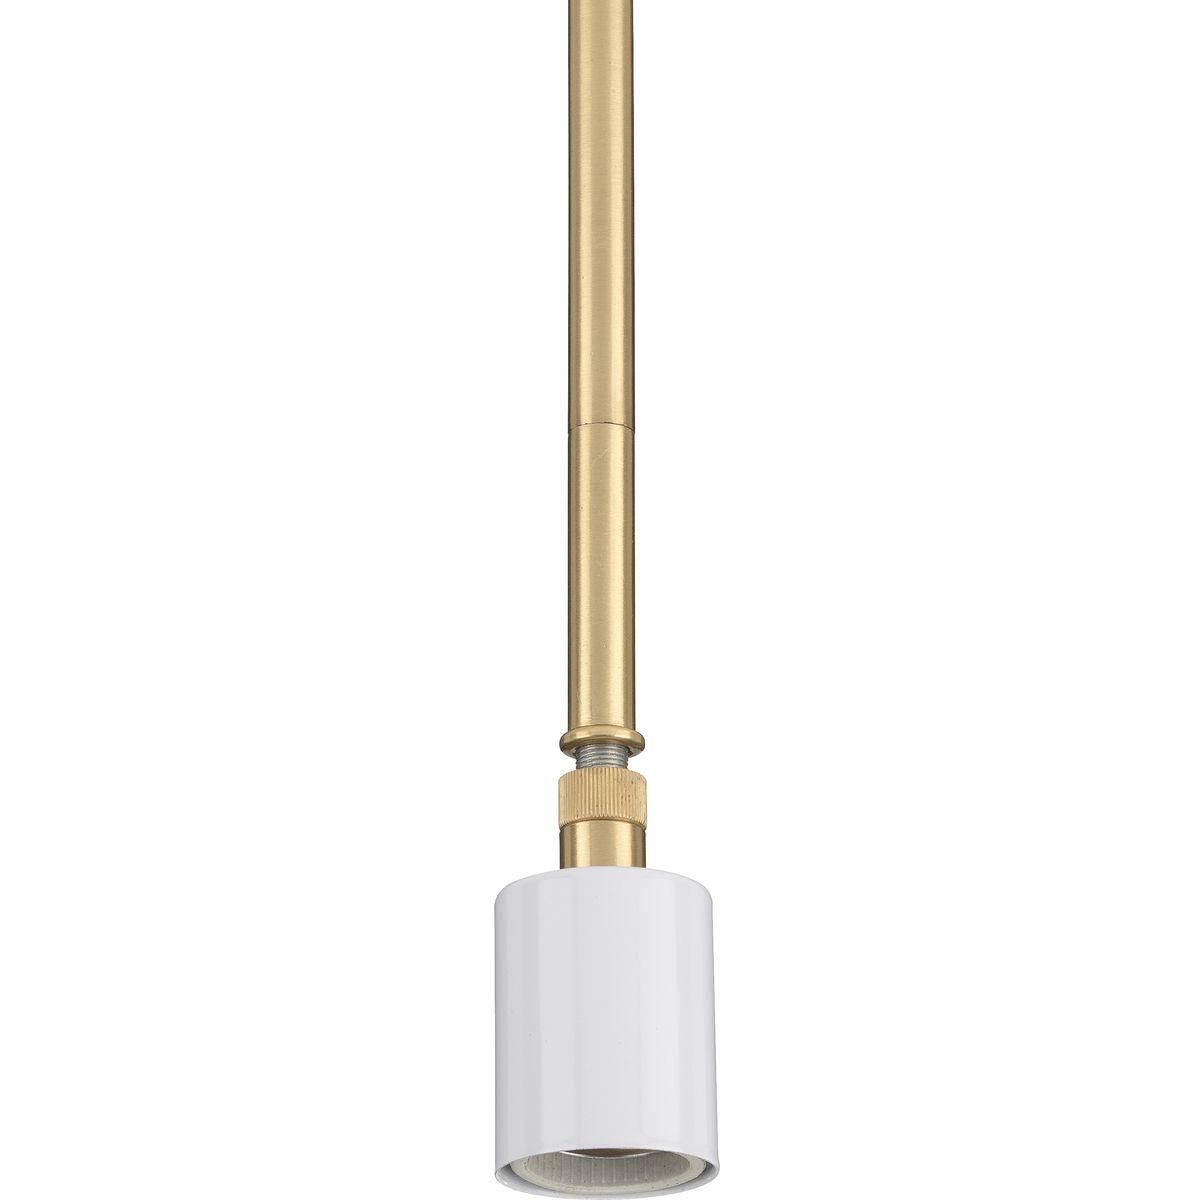 Hubbell P5198-12 This versatile modular pendant stem kit system will help to make installation simple. The stem kit allows you to customize lighting to perfectly fit the personality of your home. A satin brass finish coats this pendant stem kit system.  ; Customize lighti